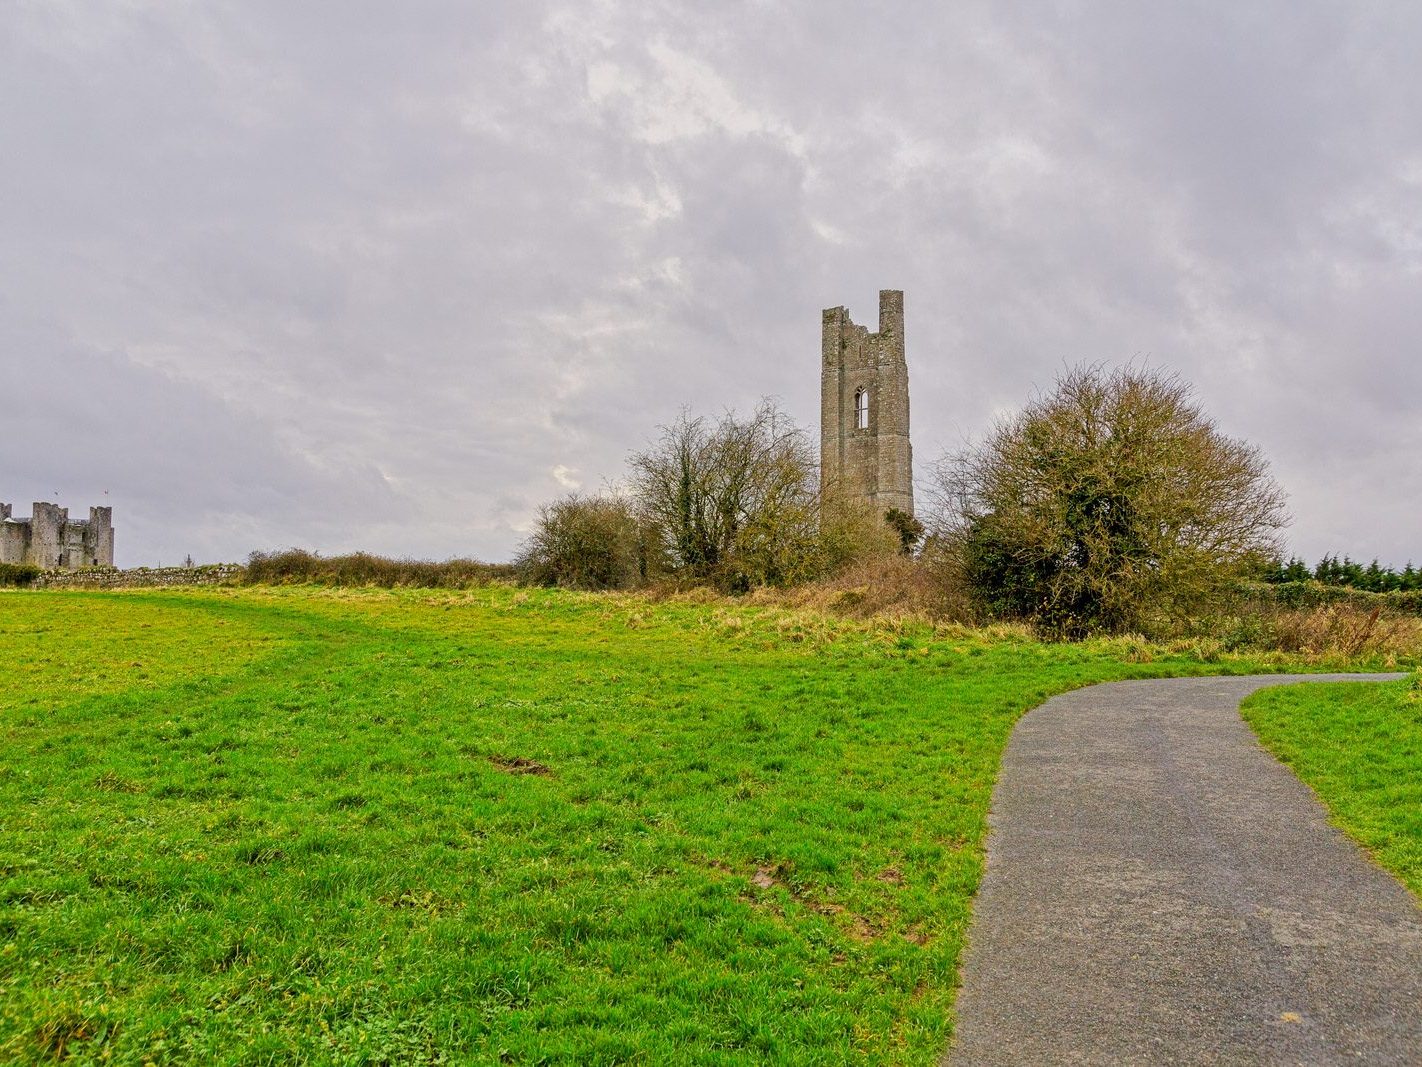 THE YELLOW STEEPLE DOMINATES THE TOWN OF TRIM [ALSO KNOWN AS ST MARYS ABBEY]-226748-1